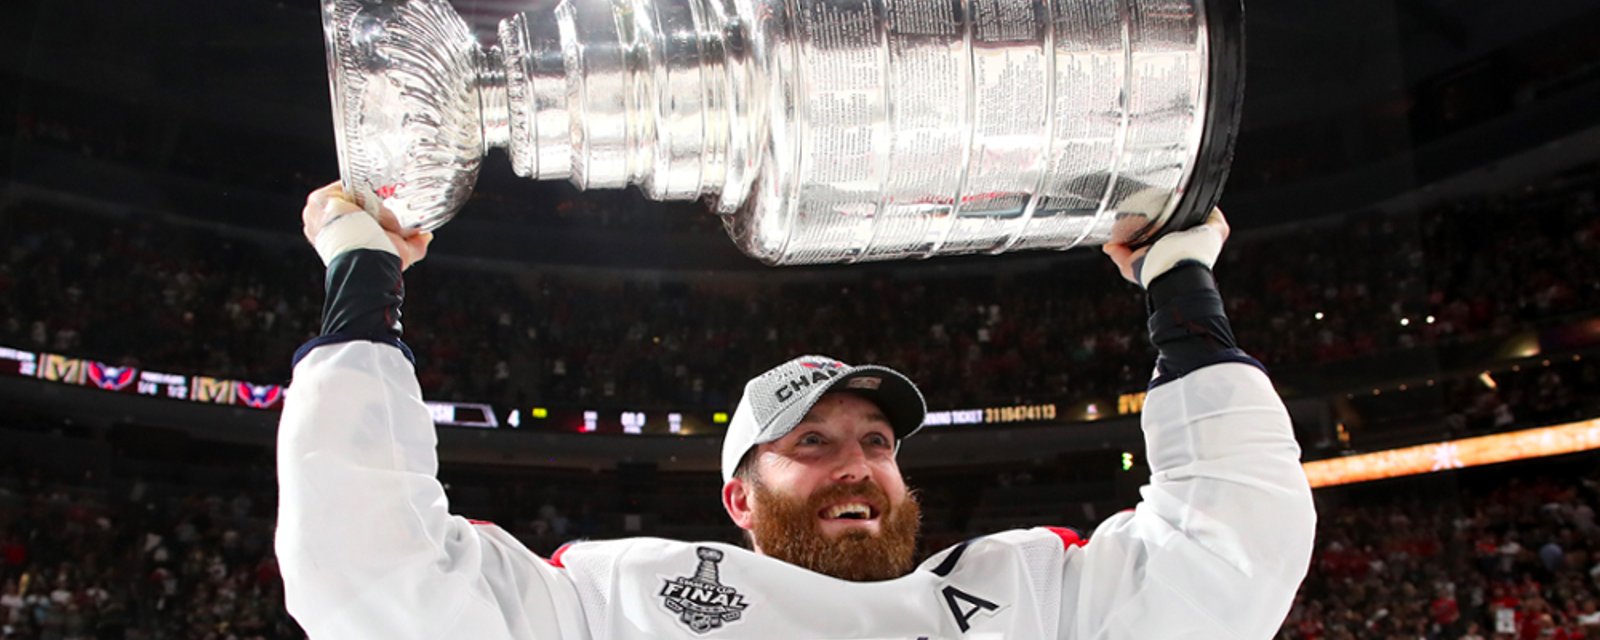 Capitals coach Brooks Orpik takes a second coaching job in NCAA